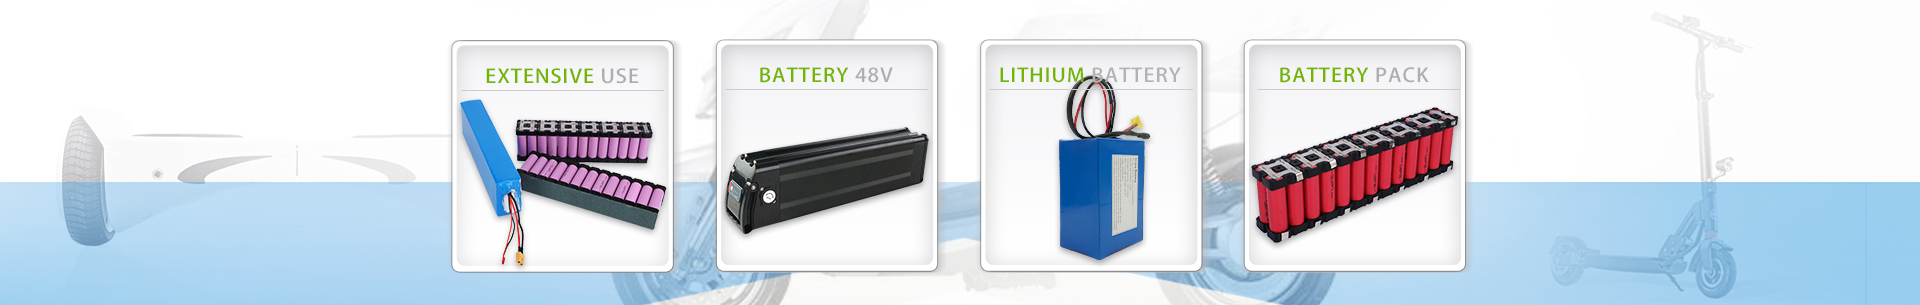 LITHIUM ION BATTERY PACK PRODUCTION PROCESS 